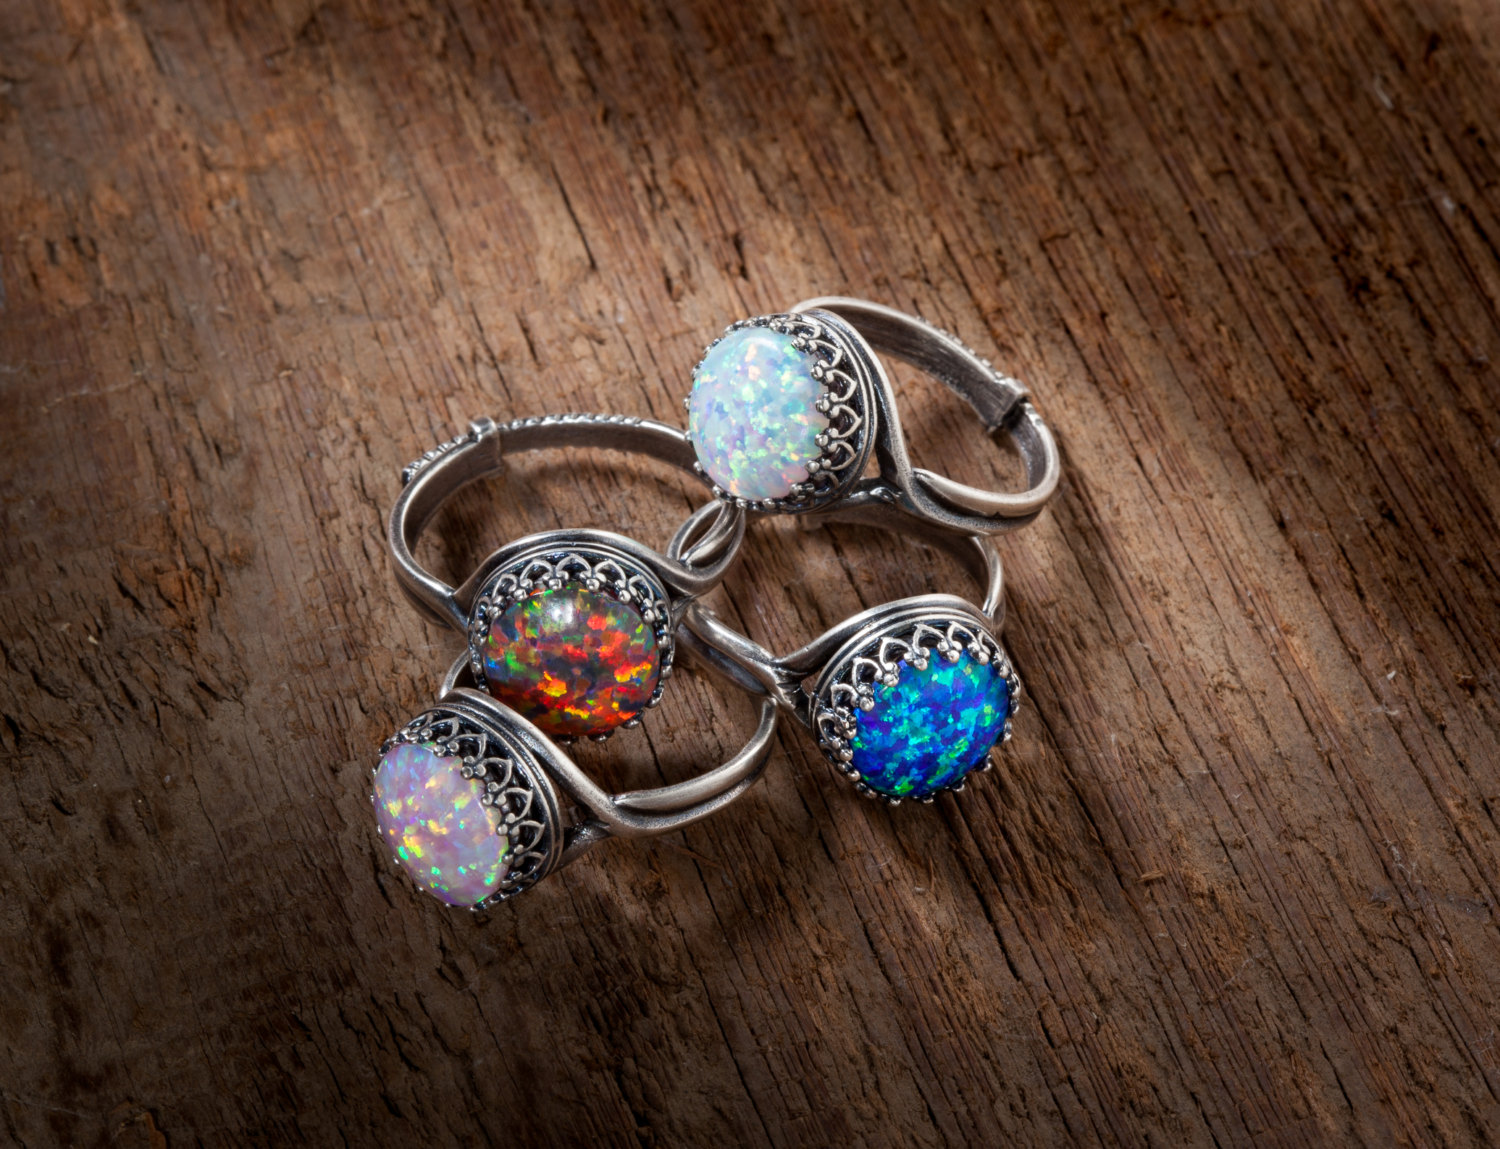 Silver Opal Ring Black Opal Ring Silver Filigree Ring with Adjustable Band Statement Ring Cocktail Ring October Birthstone Jewelry